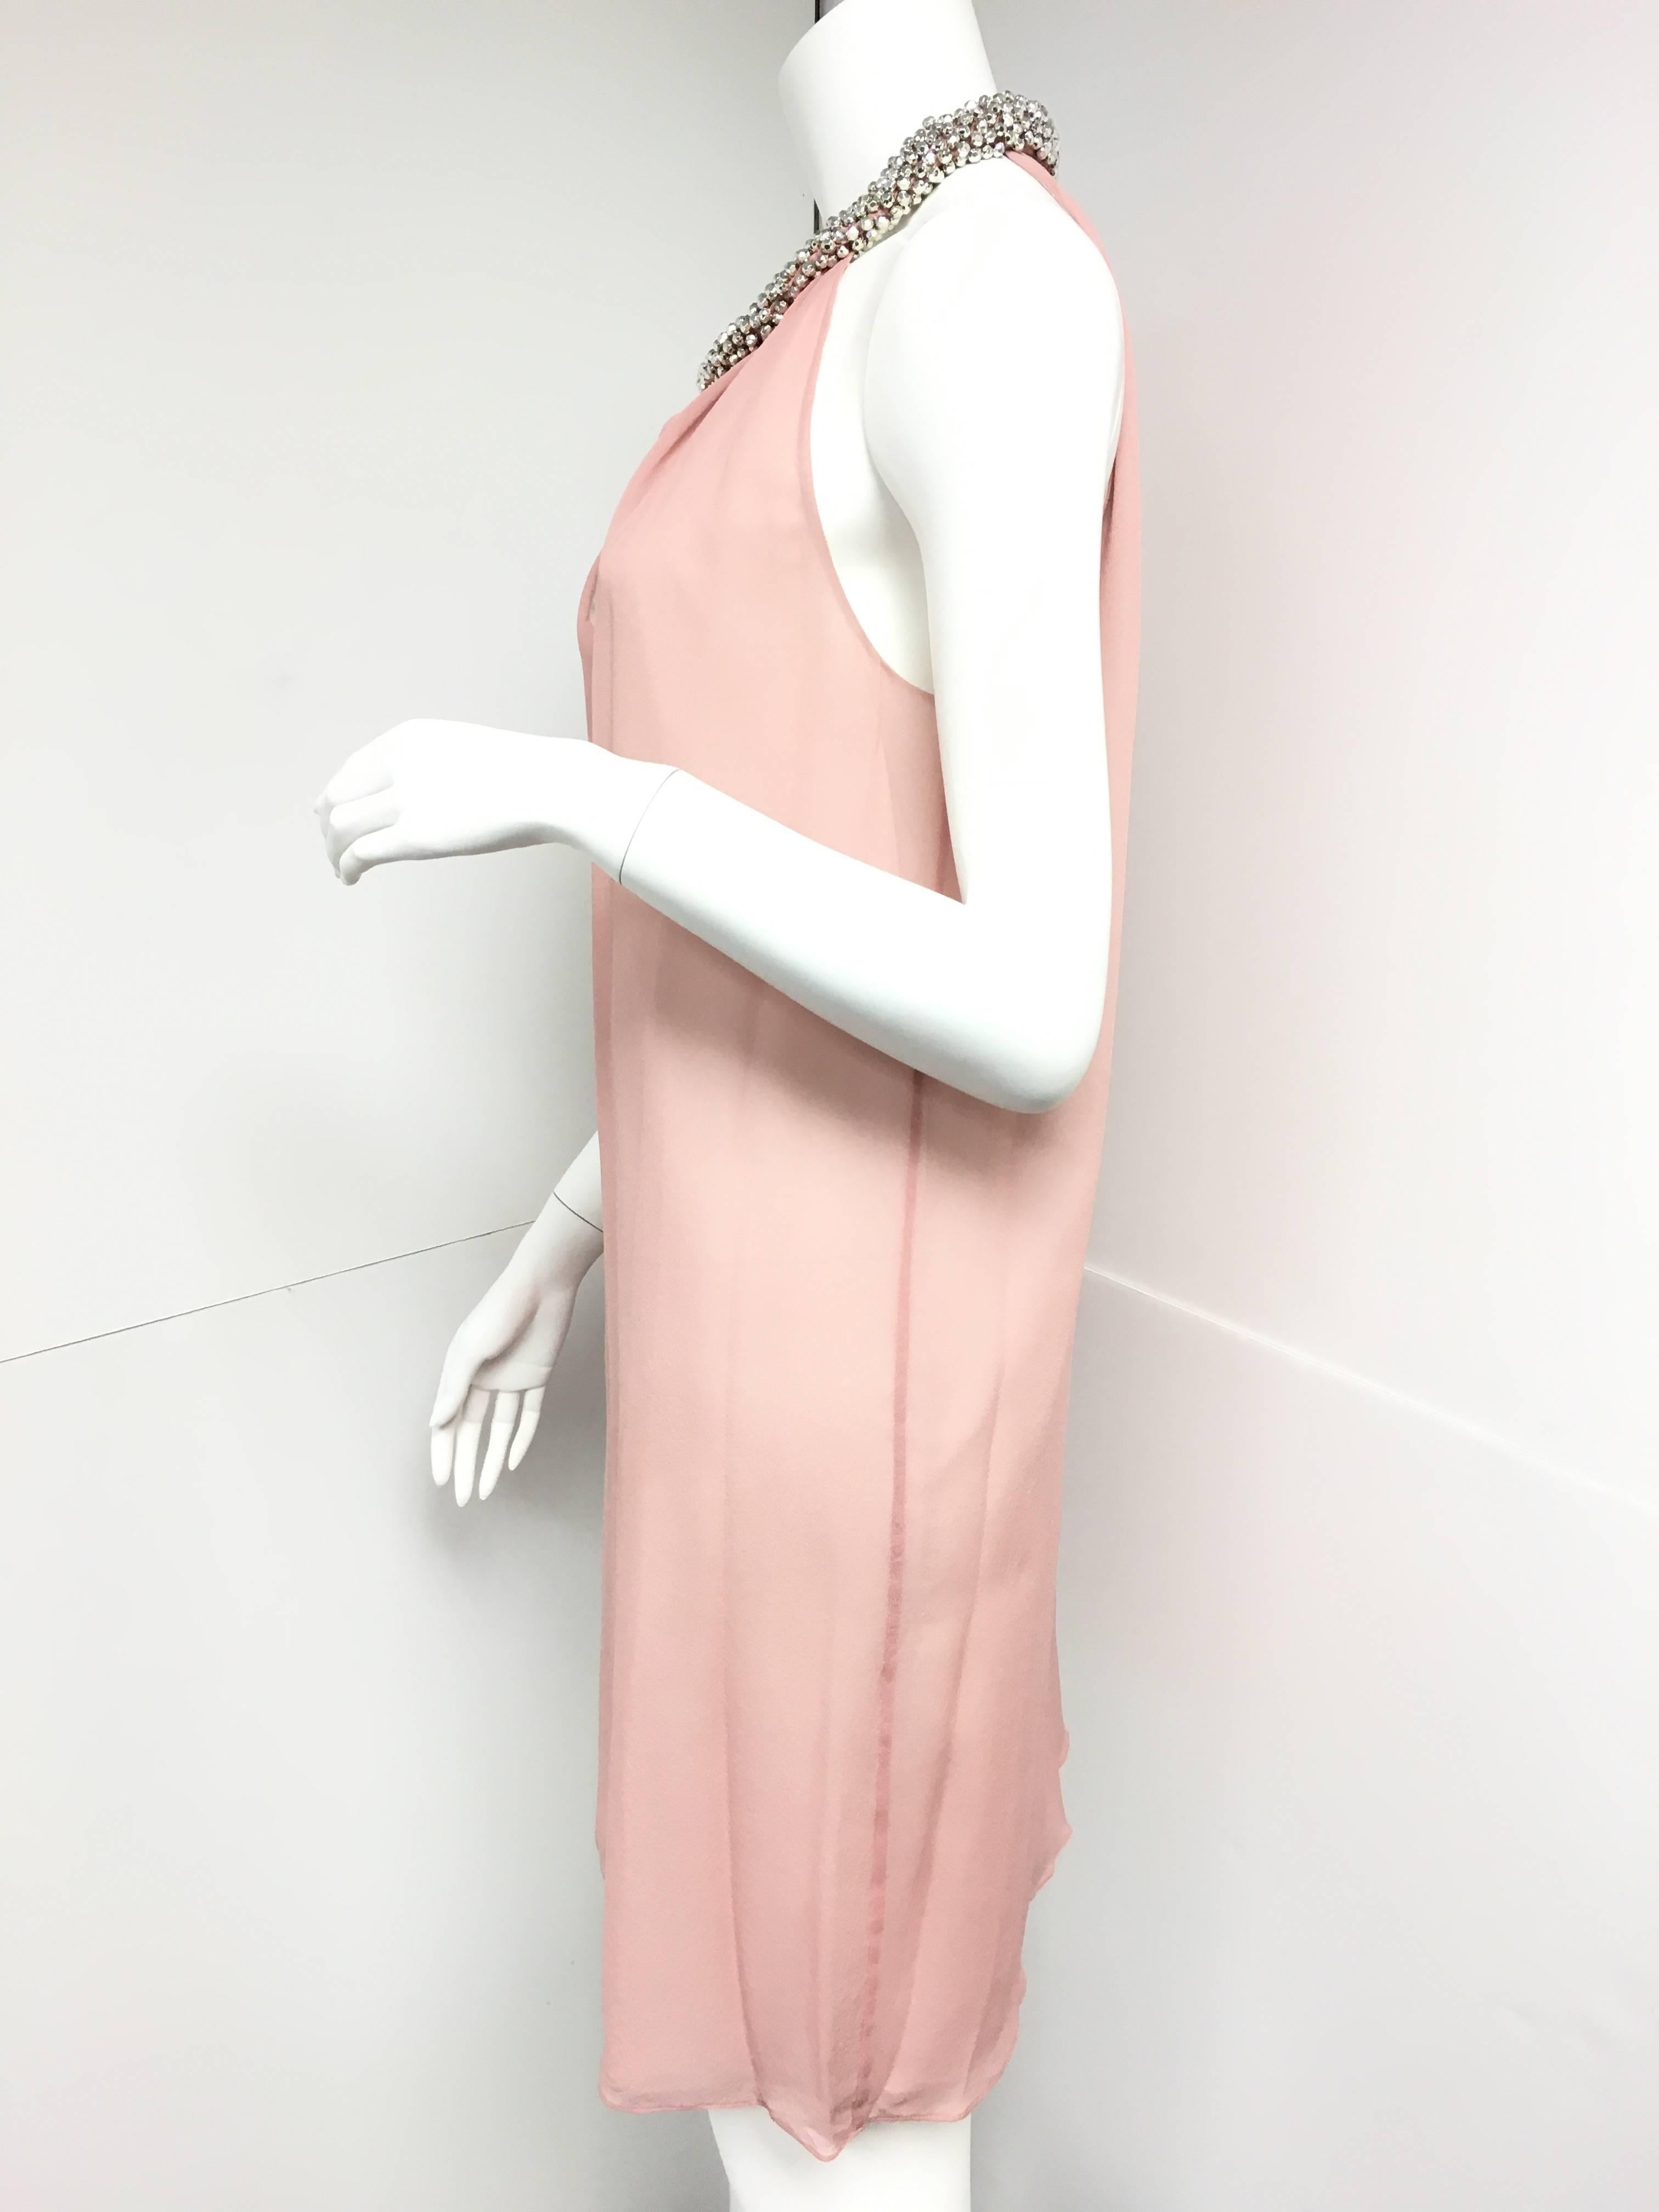 Complete the tale of a modern day princess in the Diane von Furstenberg Lainey dress by applying soft makeup and crystal-embellished pumps.
Beaded halter neckline; keyhole back.
Approx. 33"L from shoulder to hem.
Shift